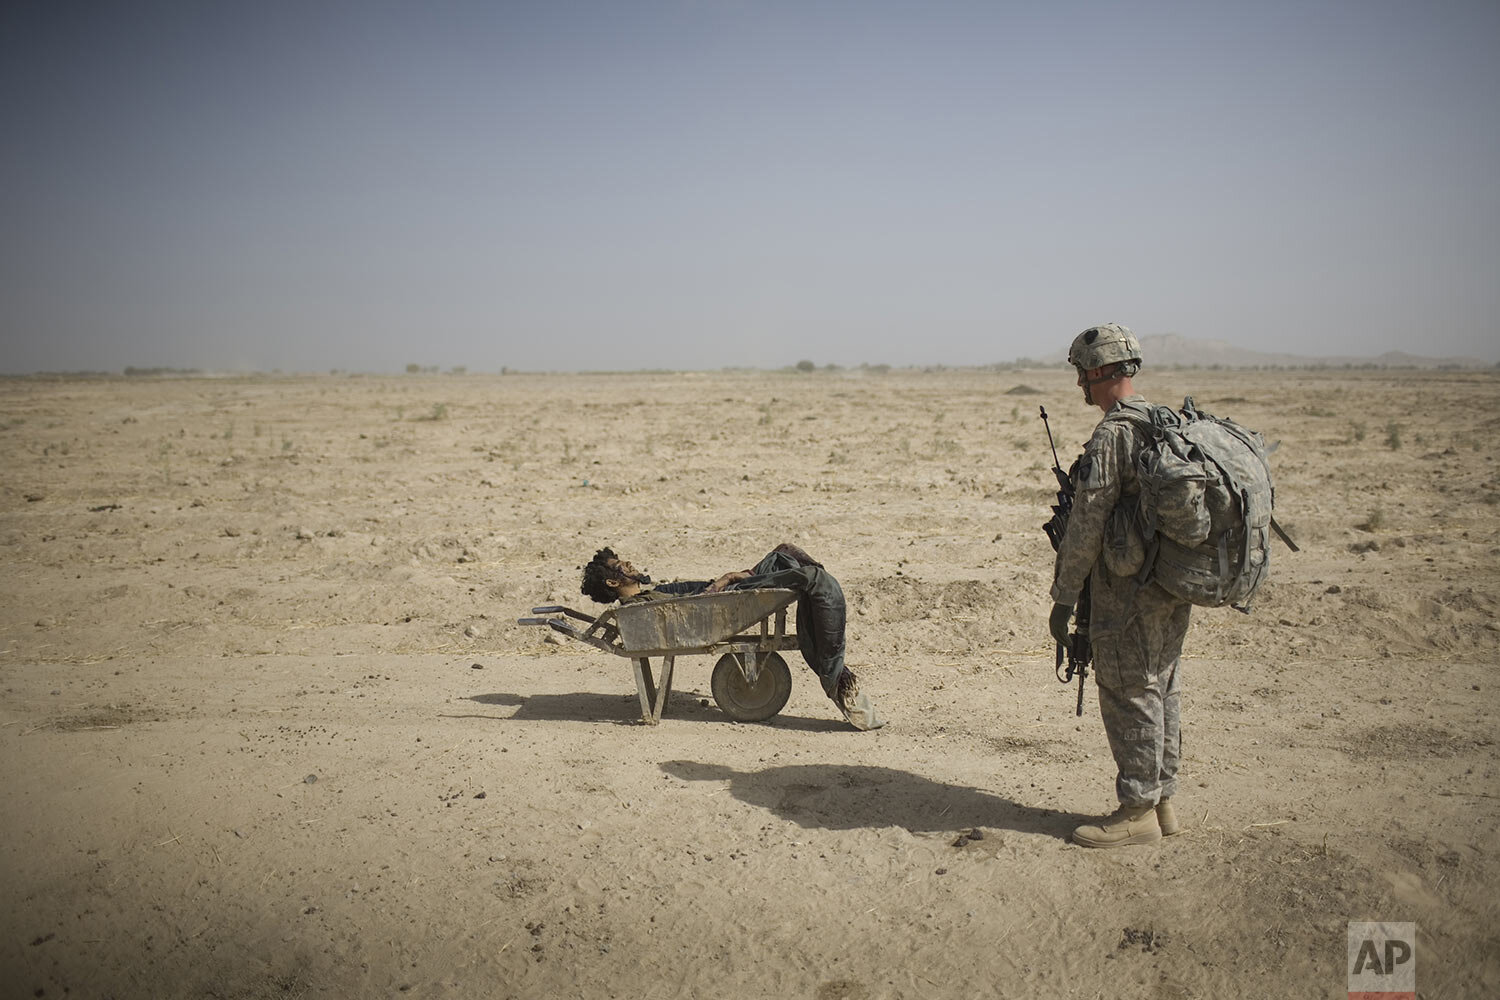  A U.S. Army soldier from Scout Platoon 502 Infantry Regiment, 101st Airborne Division, looks at the body of a suspected Taliban IED emplacer who was killed in a coalition missile strike in Zhari district, Kandahar province, Sunday, Oct. 10, 2010.  T